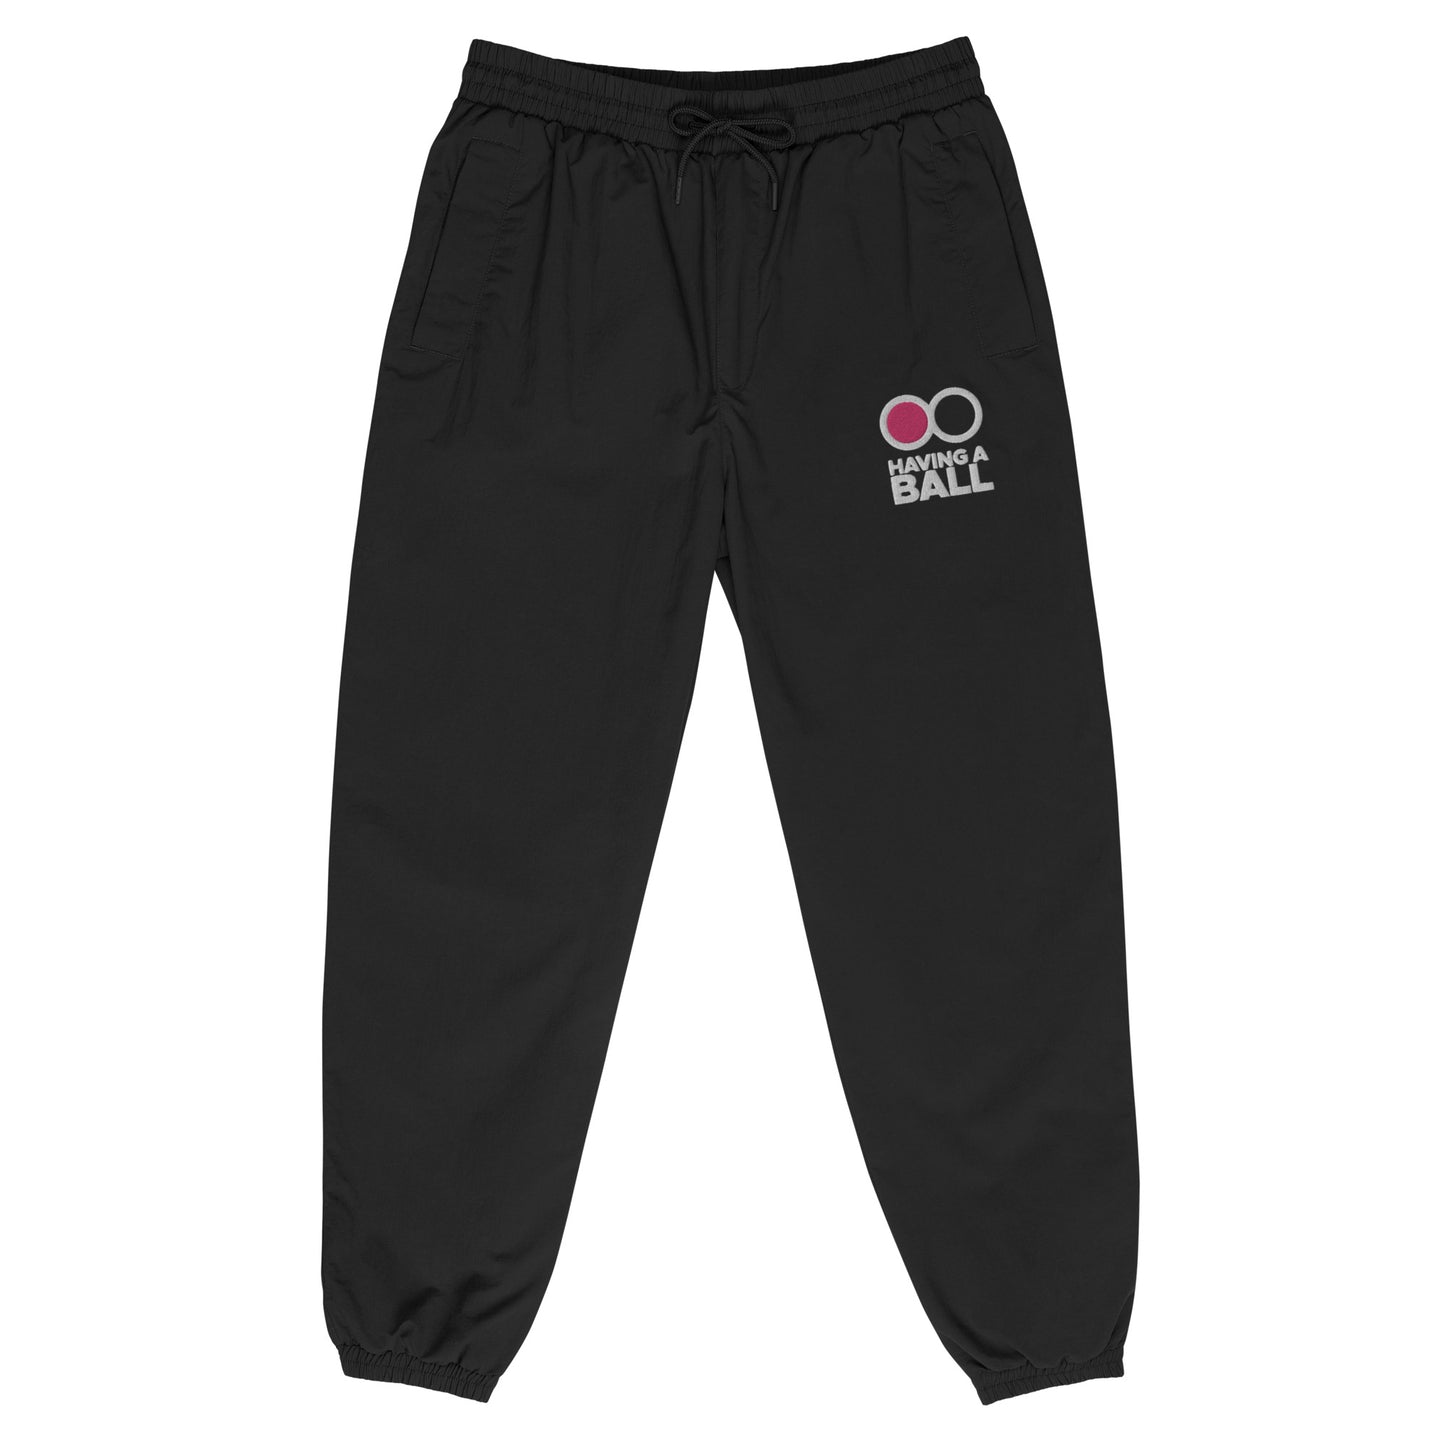 Having A Ball - Tracksuit Trousers (Unisex)